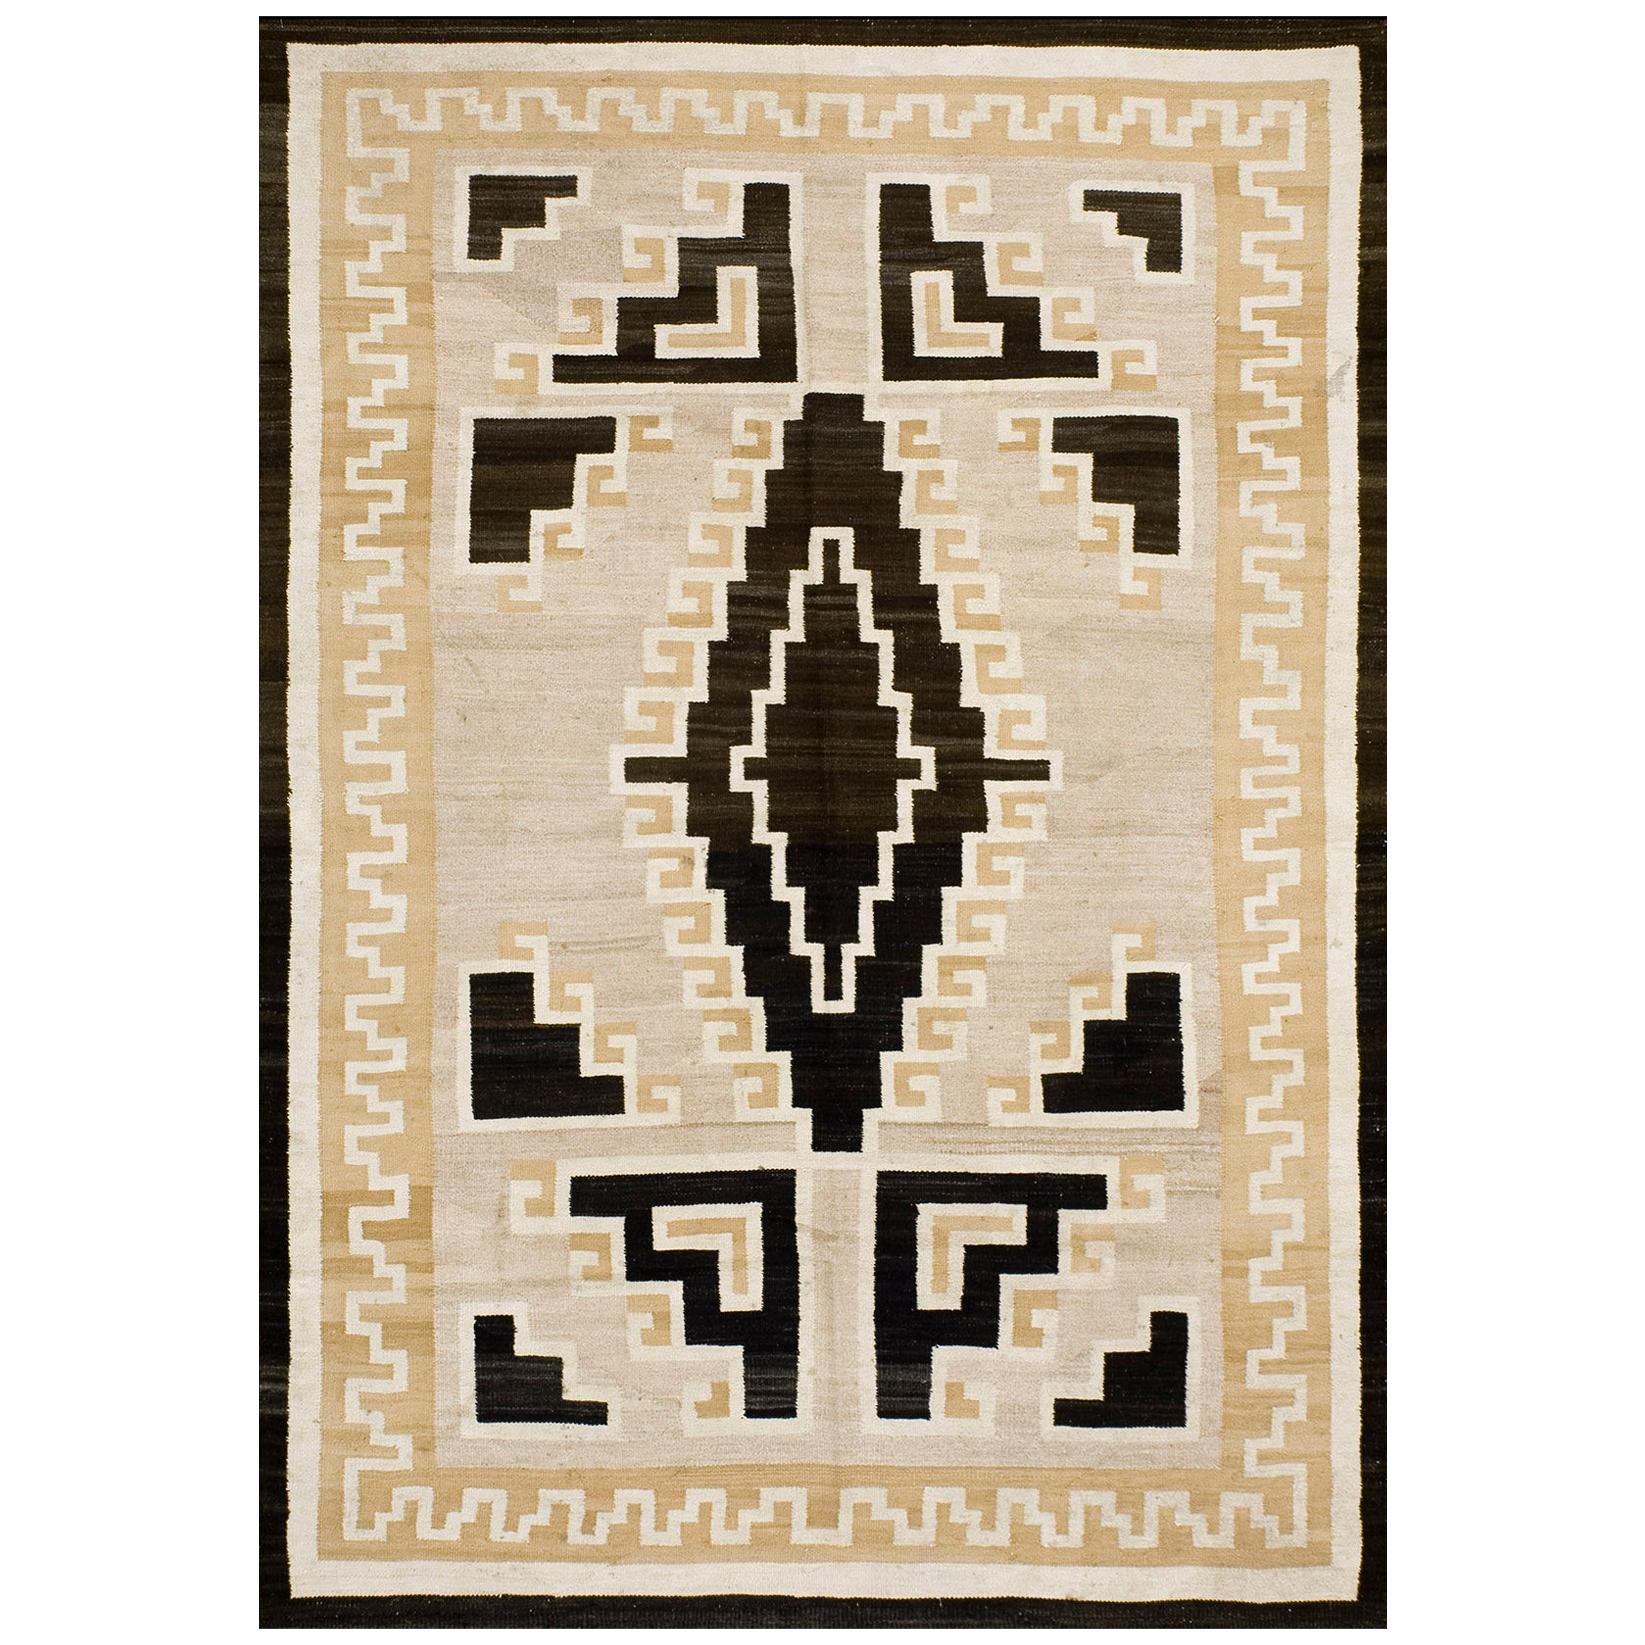 1930s American Two Grey Hills Navajo Carpet ( 5'4" x 7'10" - 165 x 240 ) For Sale